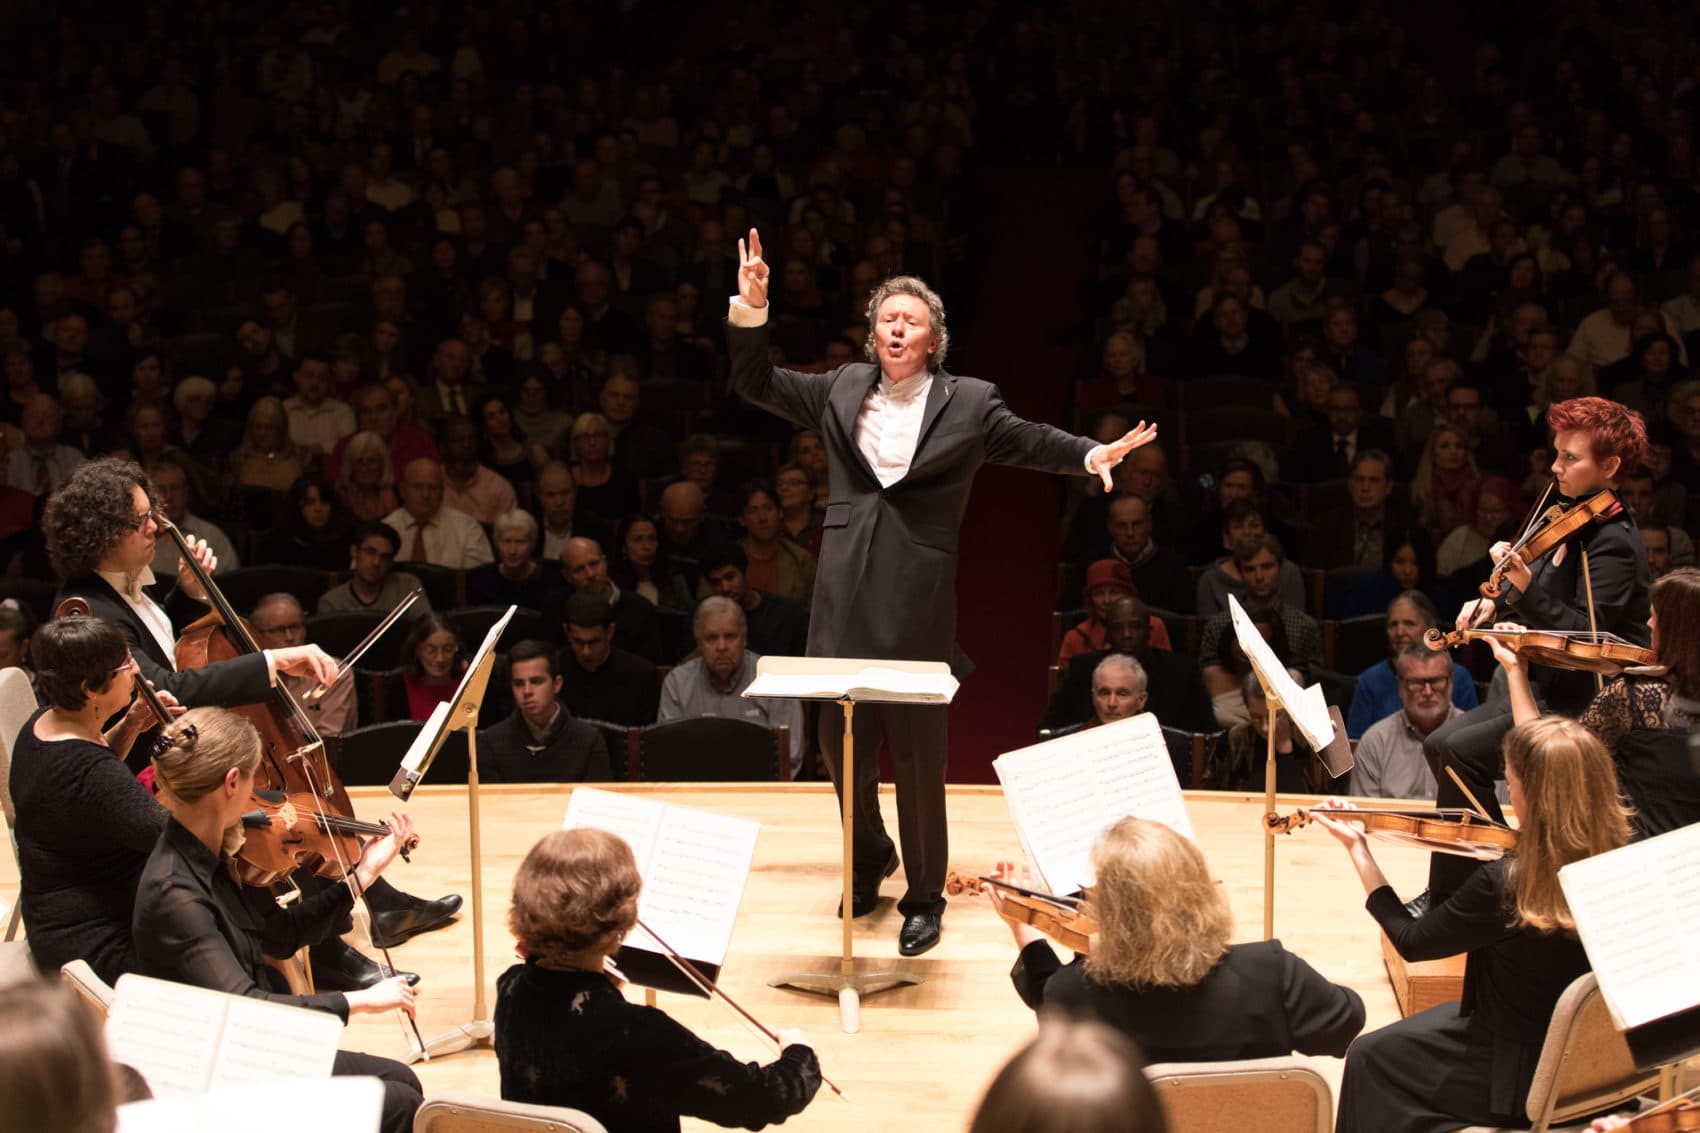 The Handel and Haydn Society's artistic director Harry Christophers. (Courtesy Michael Blanchard)